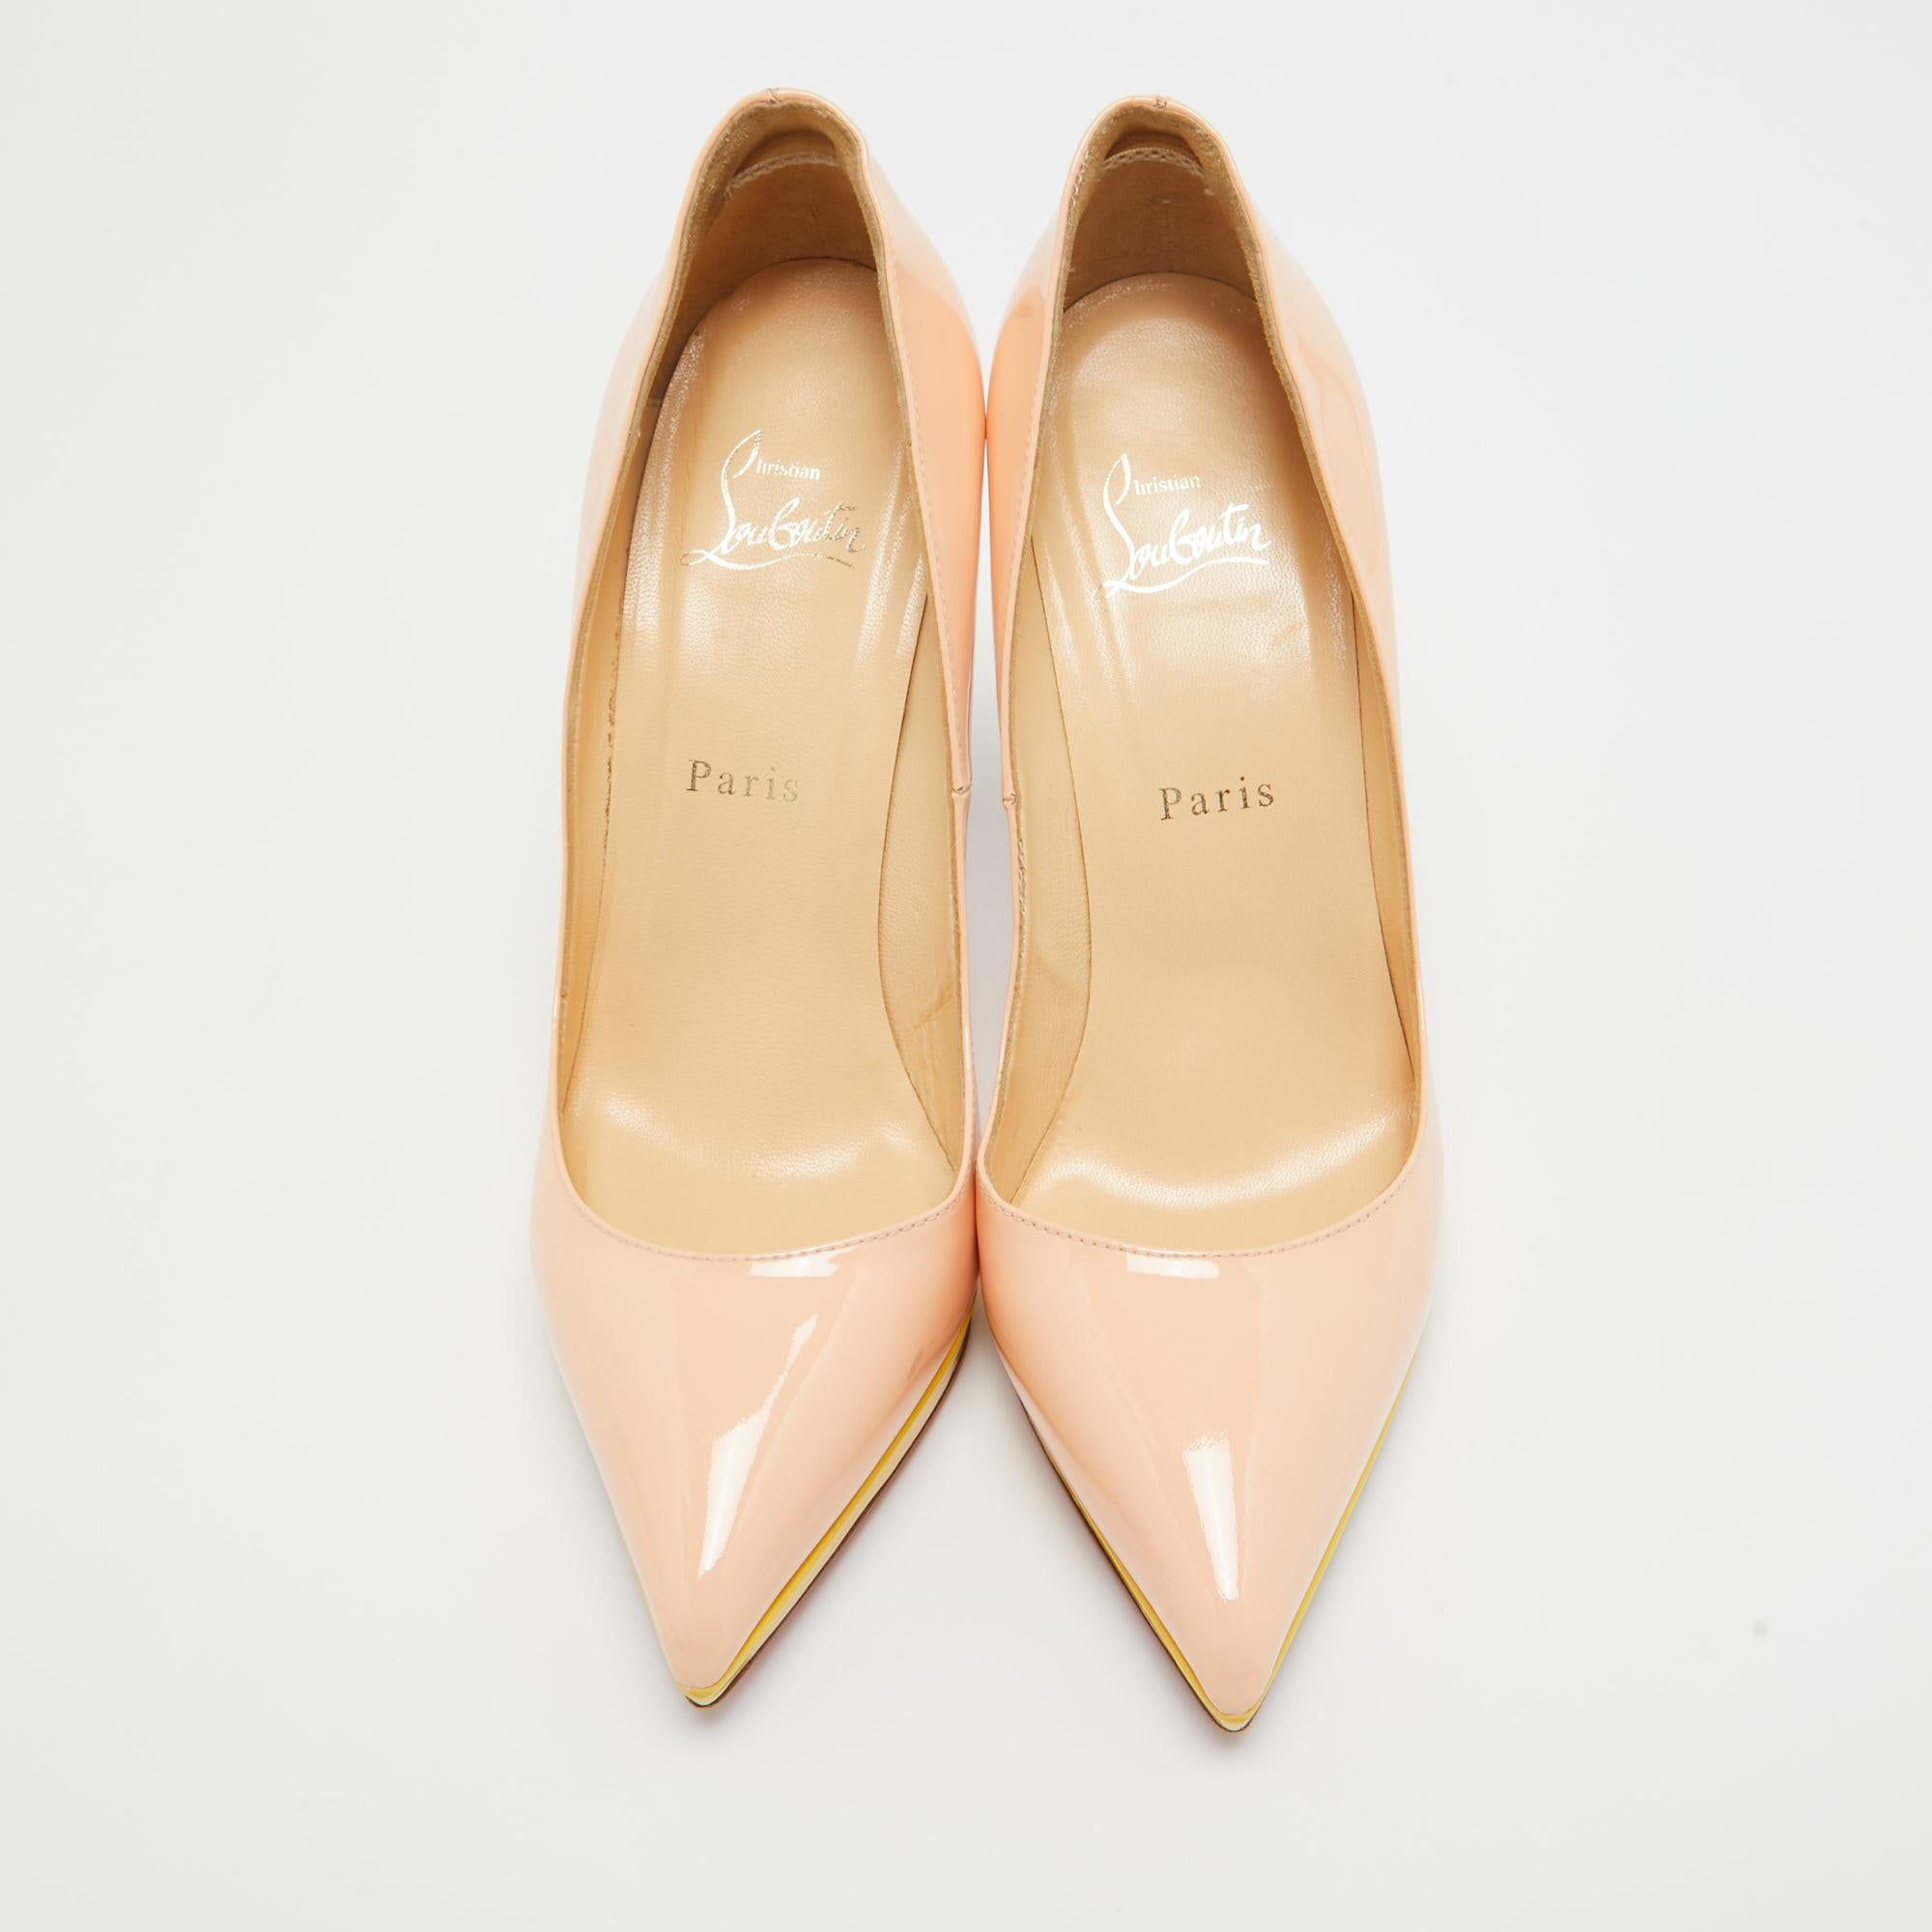 Perfectly sewn and finished to ensure an elegant look and fit, these Christian Louboutin pumps are a purchase you'll love flaunting. They look great on the feet.

Includes: Extra Heel Tips